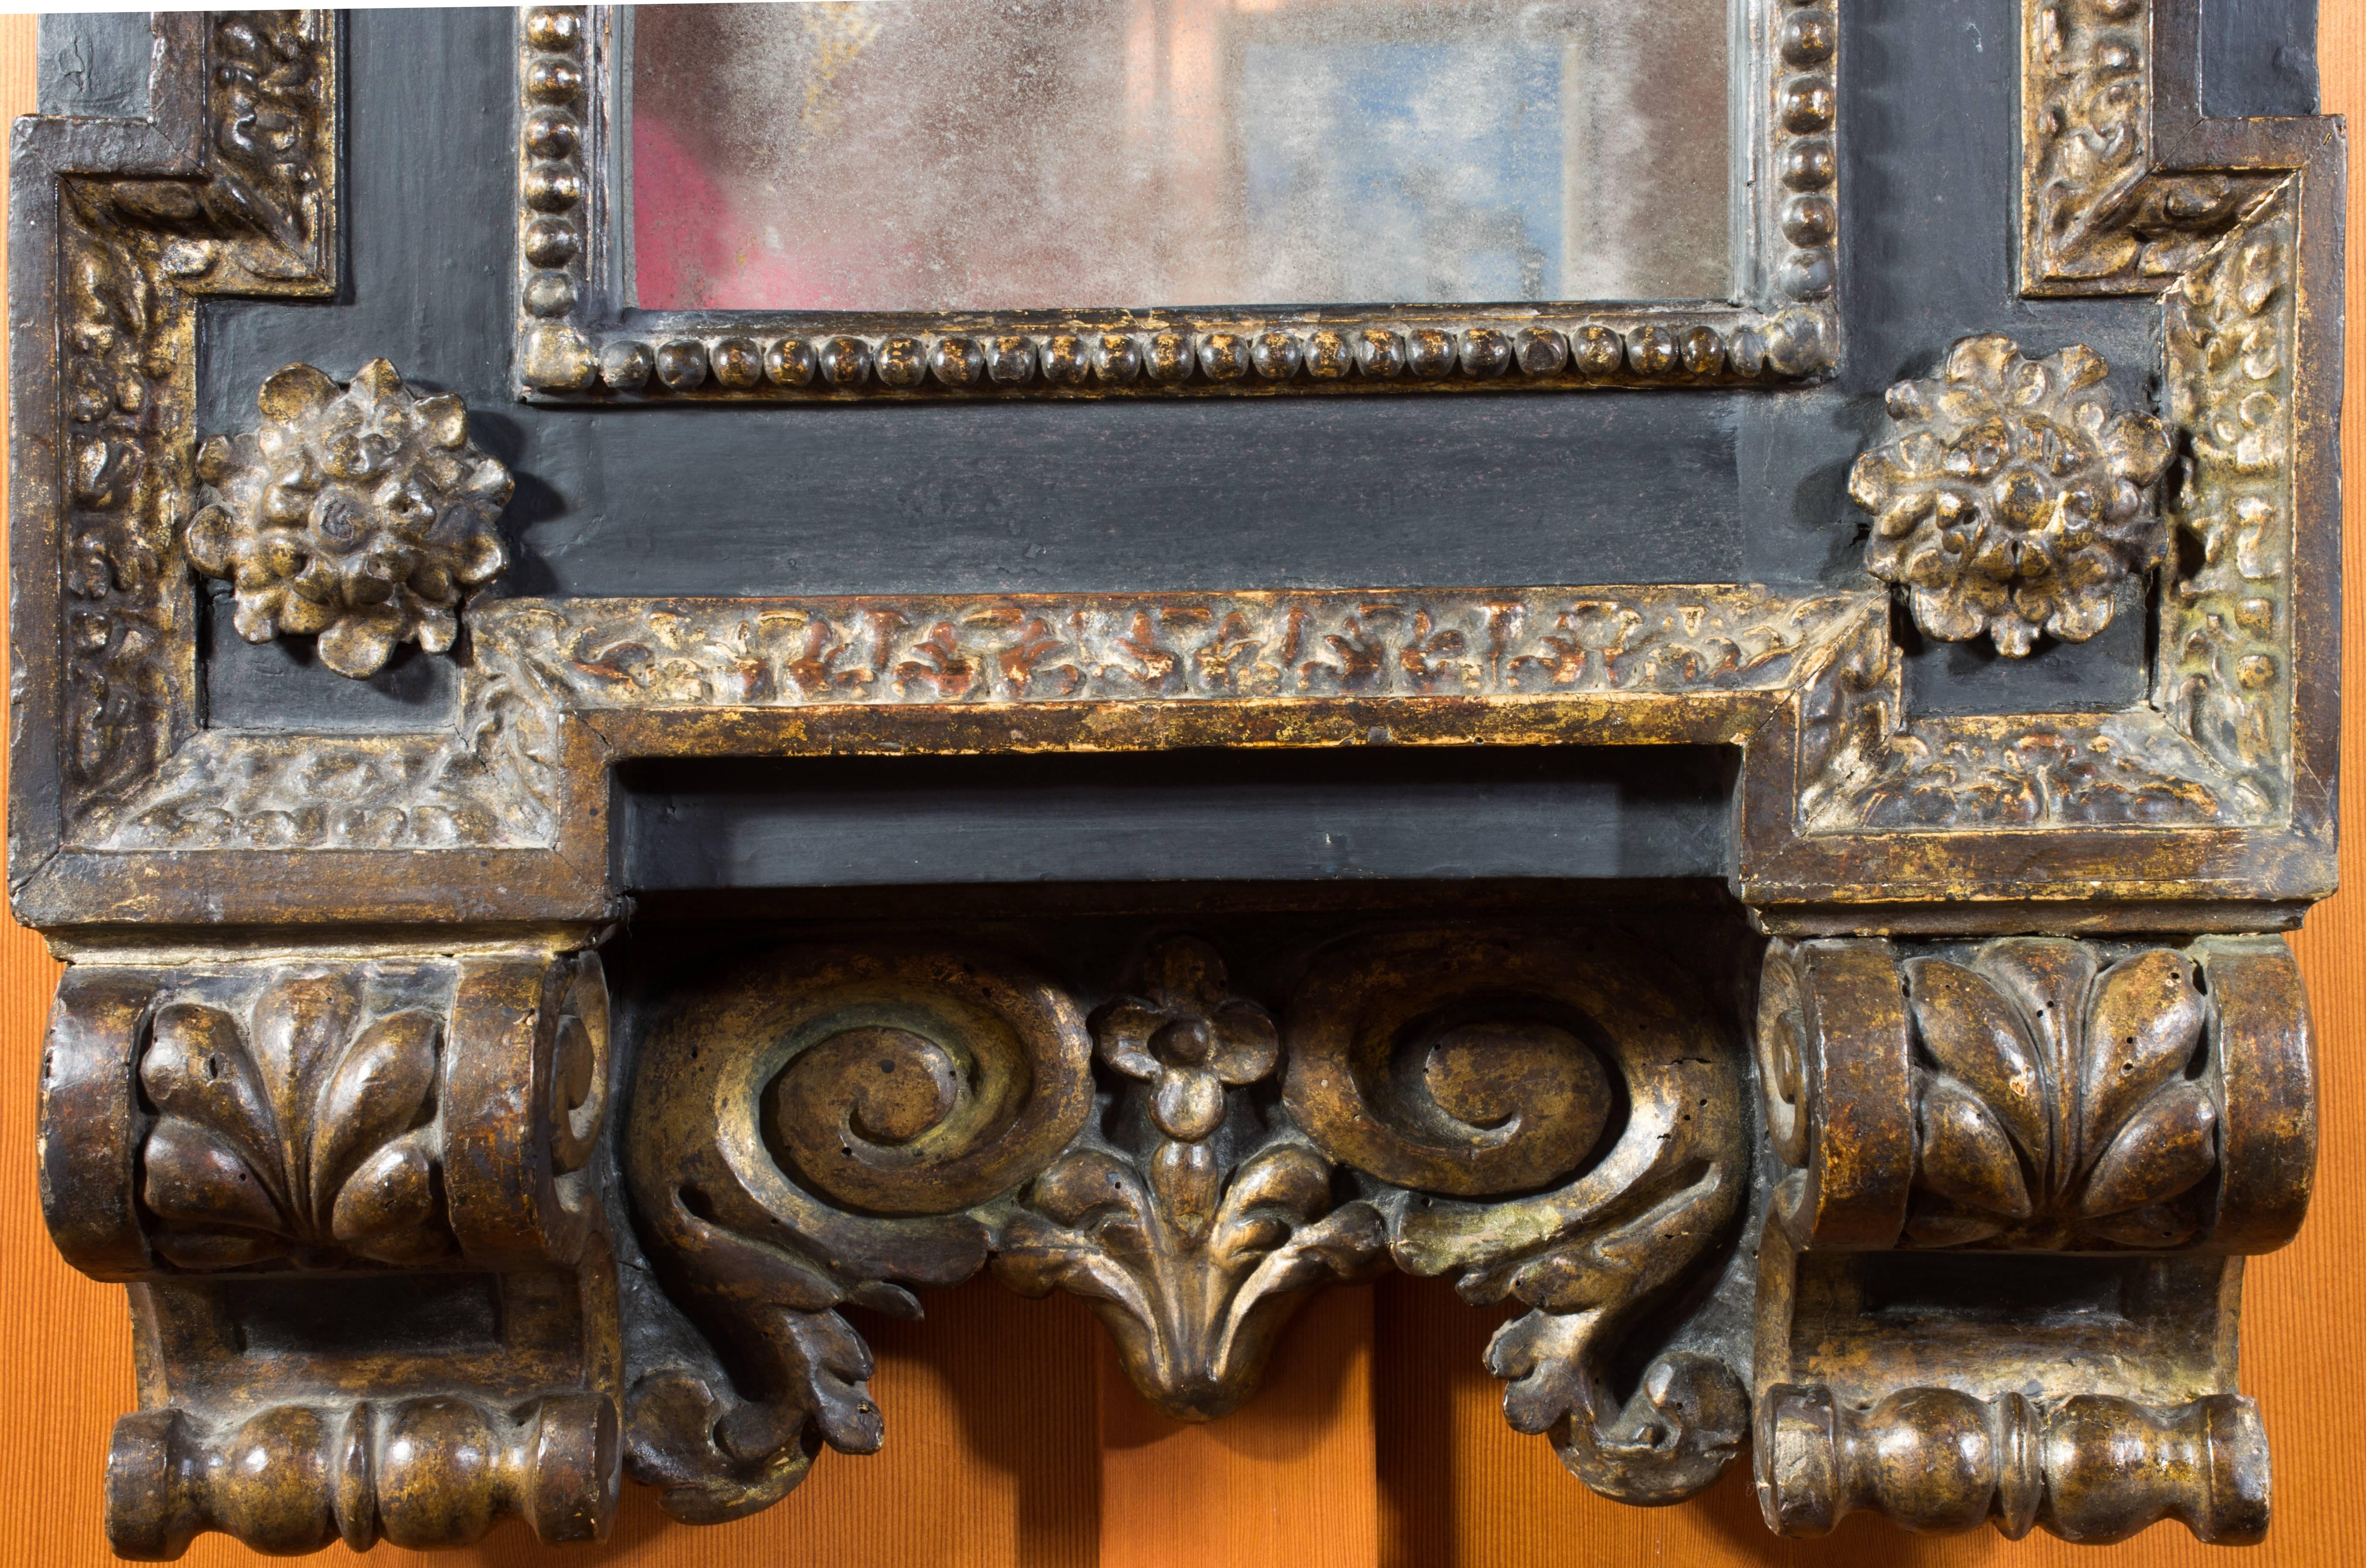 Carved Mannerist Italian Wood Tabernacle Mirror from the Collection of David Abbato For Sale